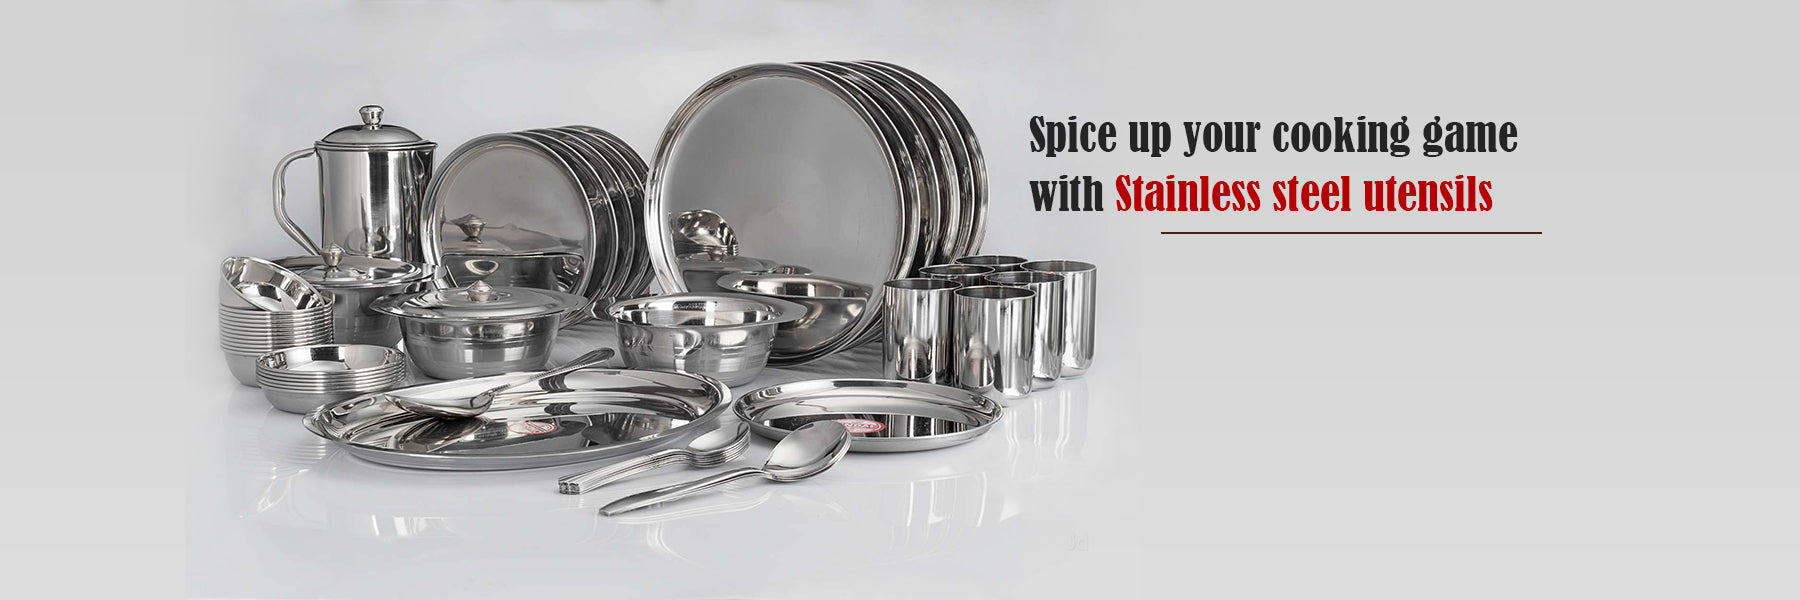 Spice up your cooking game with Stainless steel utensils. FromIndia.com